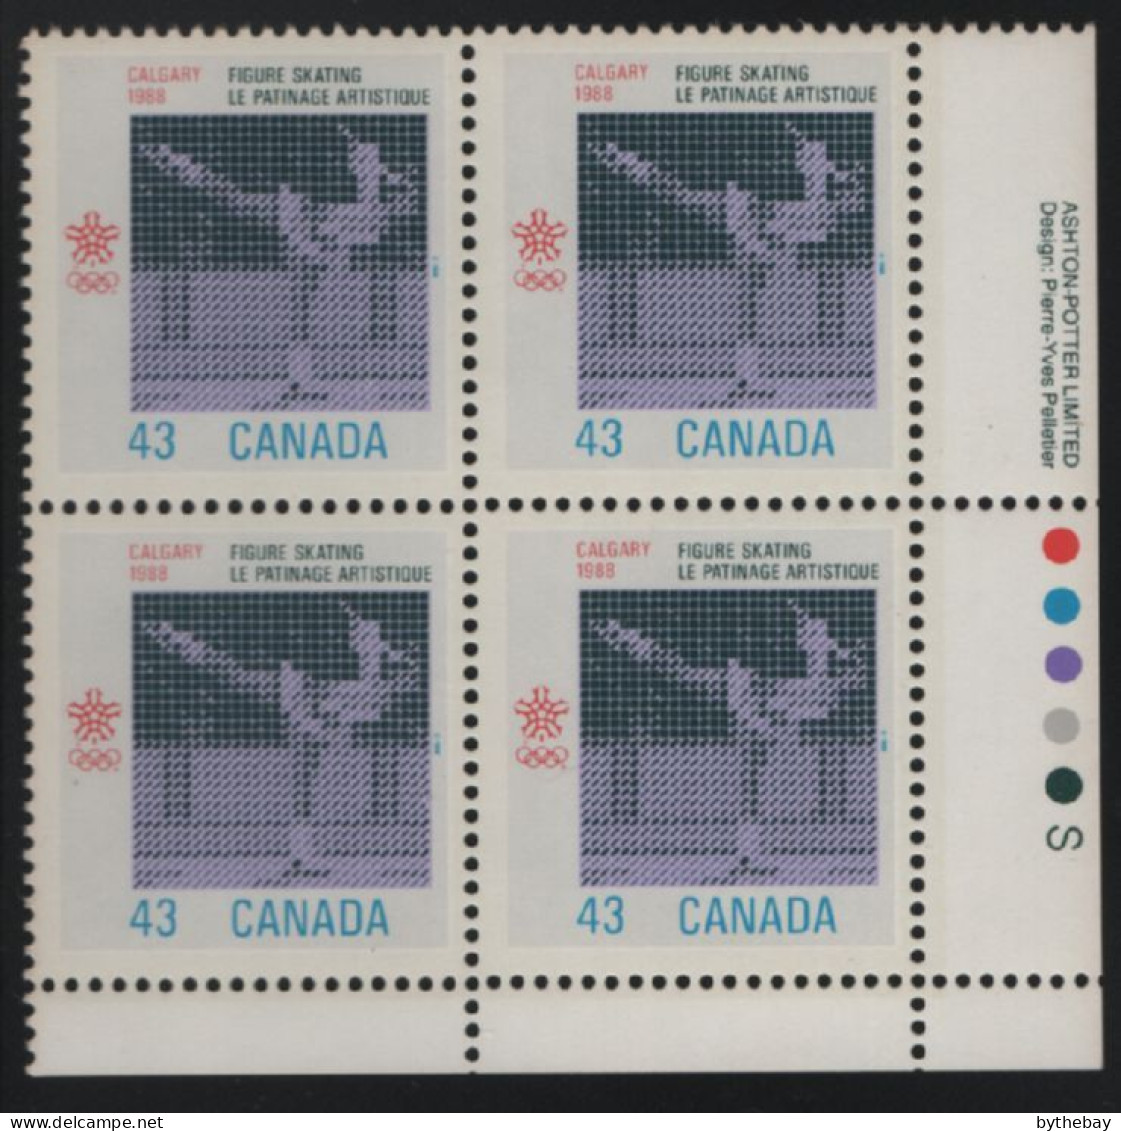 Canada 1988 MNH Sc 1197 47c Figure Skating LR Plate Block - Num. Planches & Inscriptions Marge